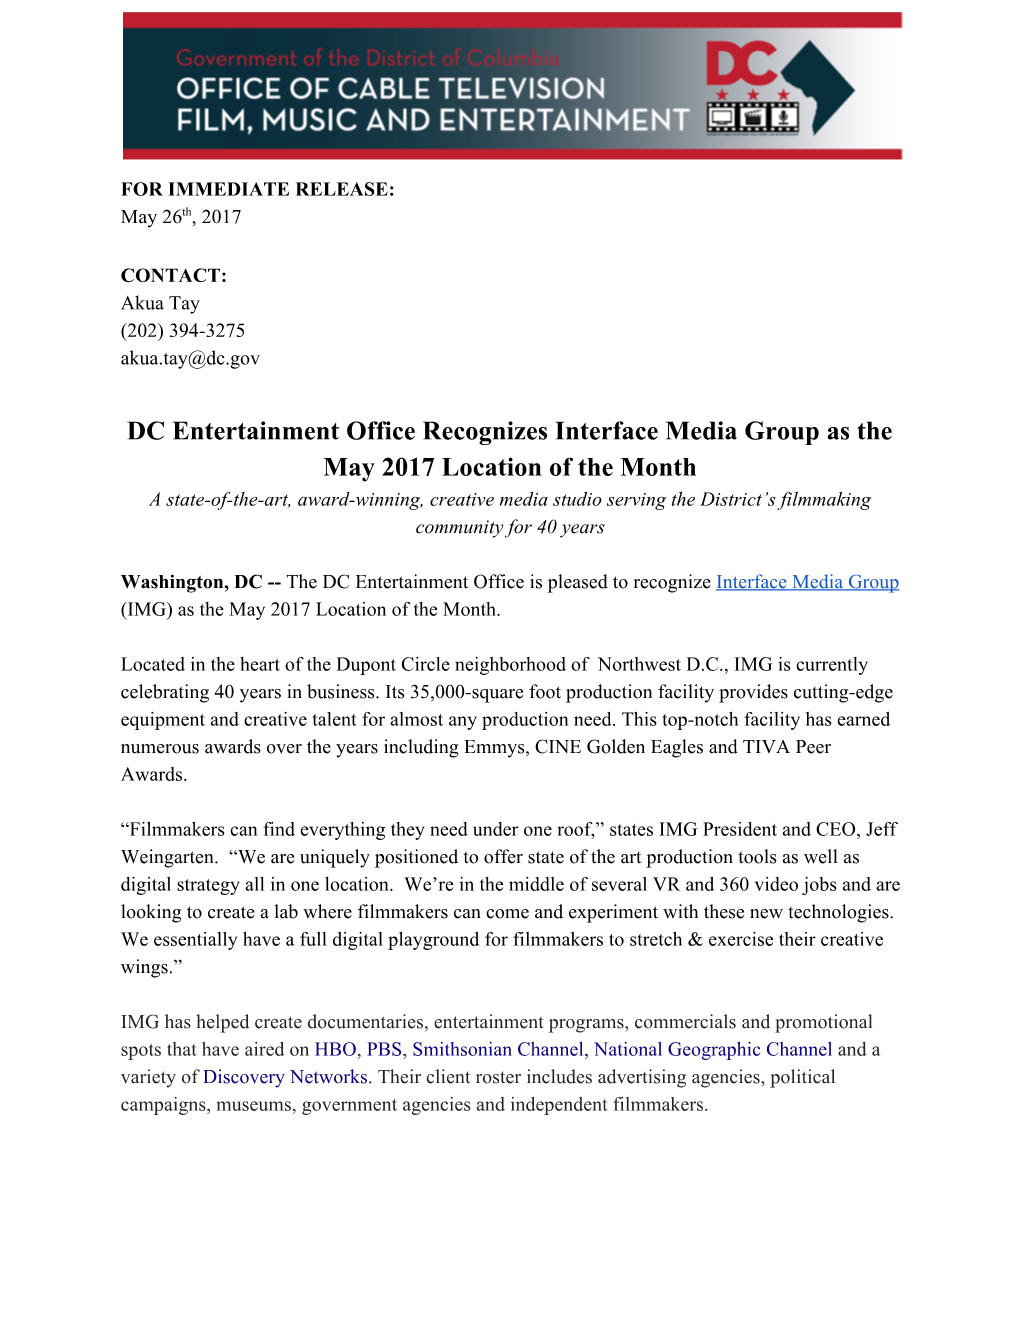 DC Entertainment Office Recognizes Interface Media Group As the May